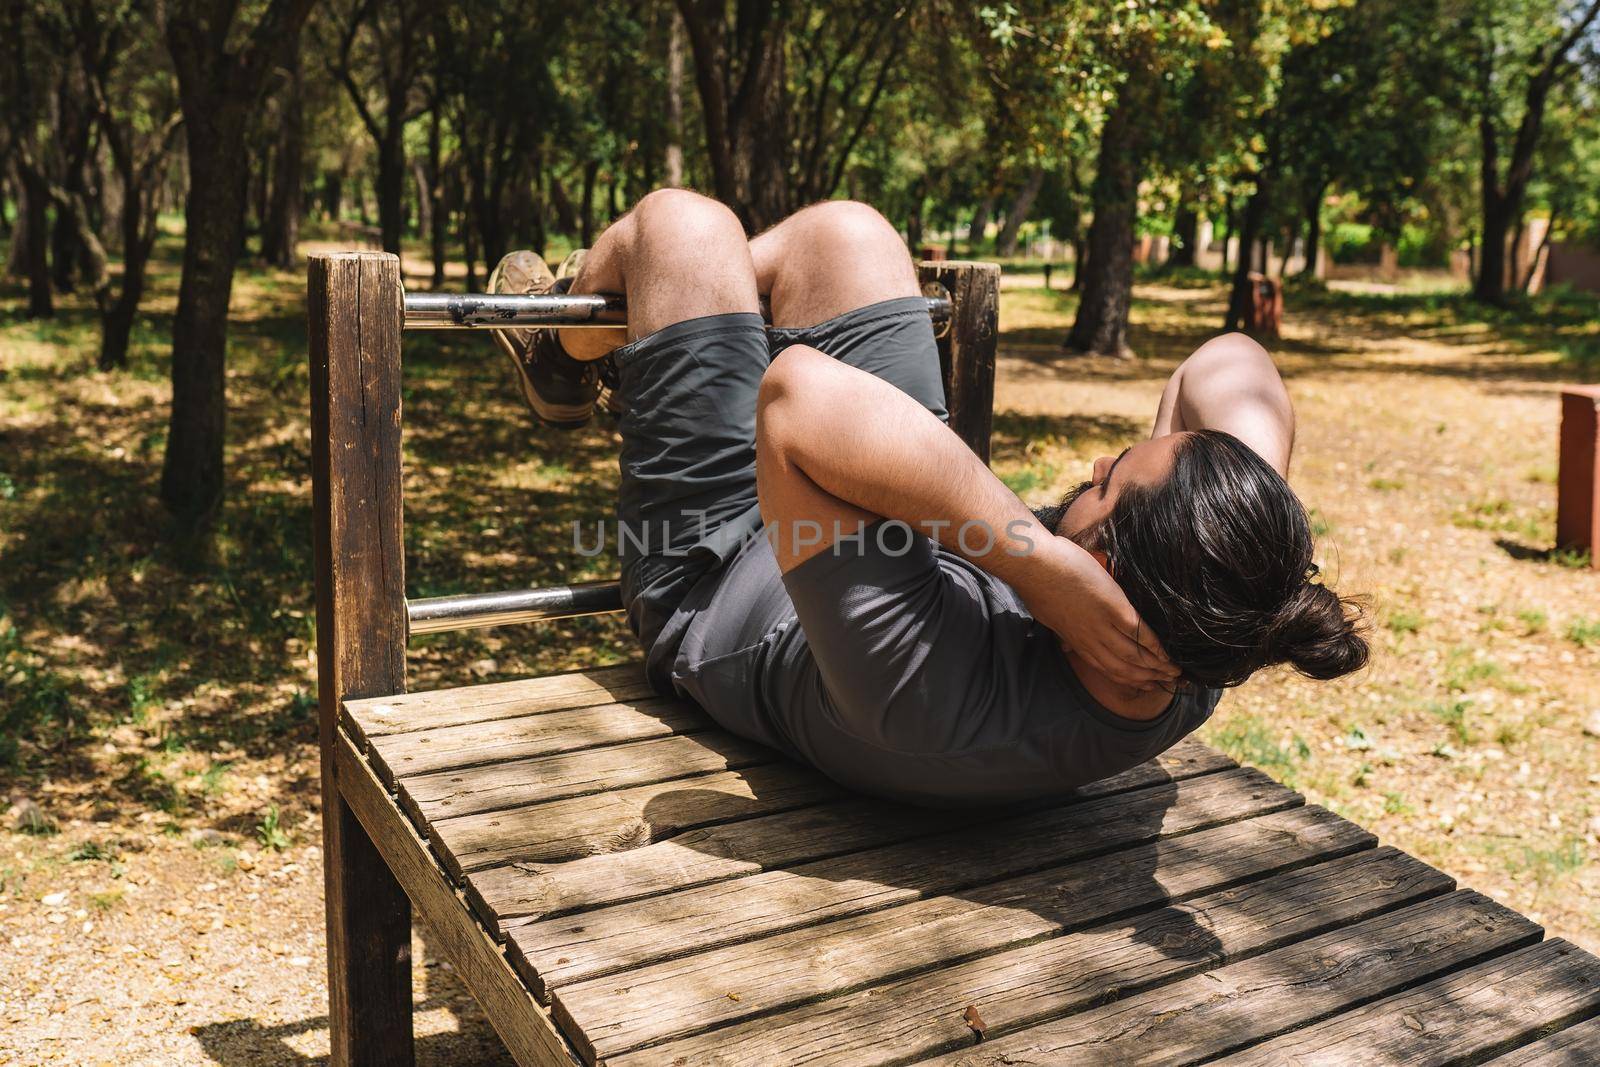 young athletic man doing abs in an outdoor public park. young athlete preparing for a championship. health and wellness lifestyle. by CatPhotography